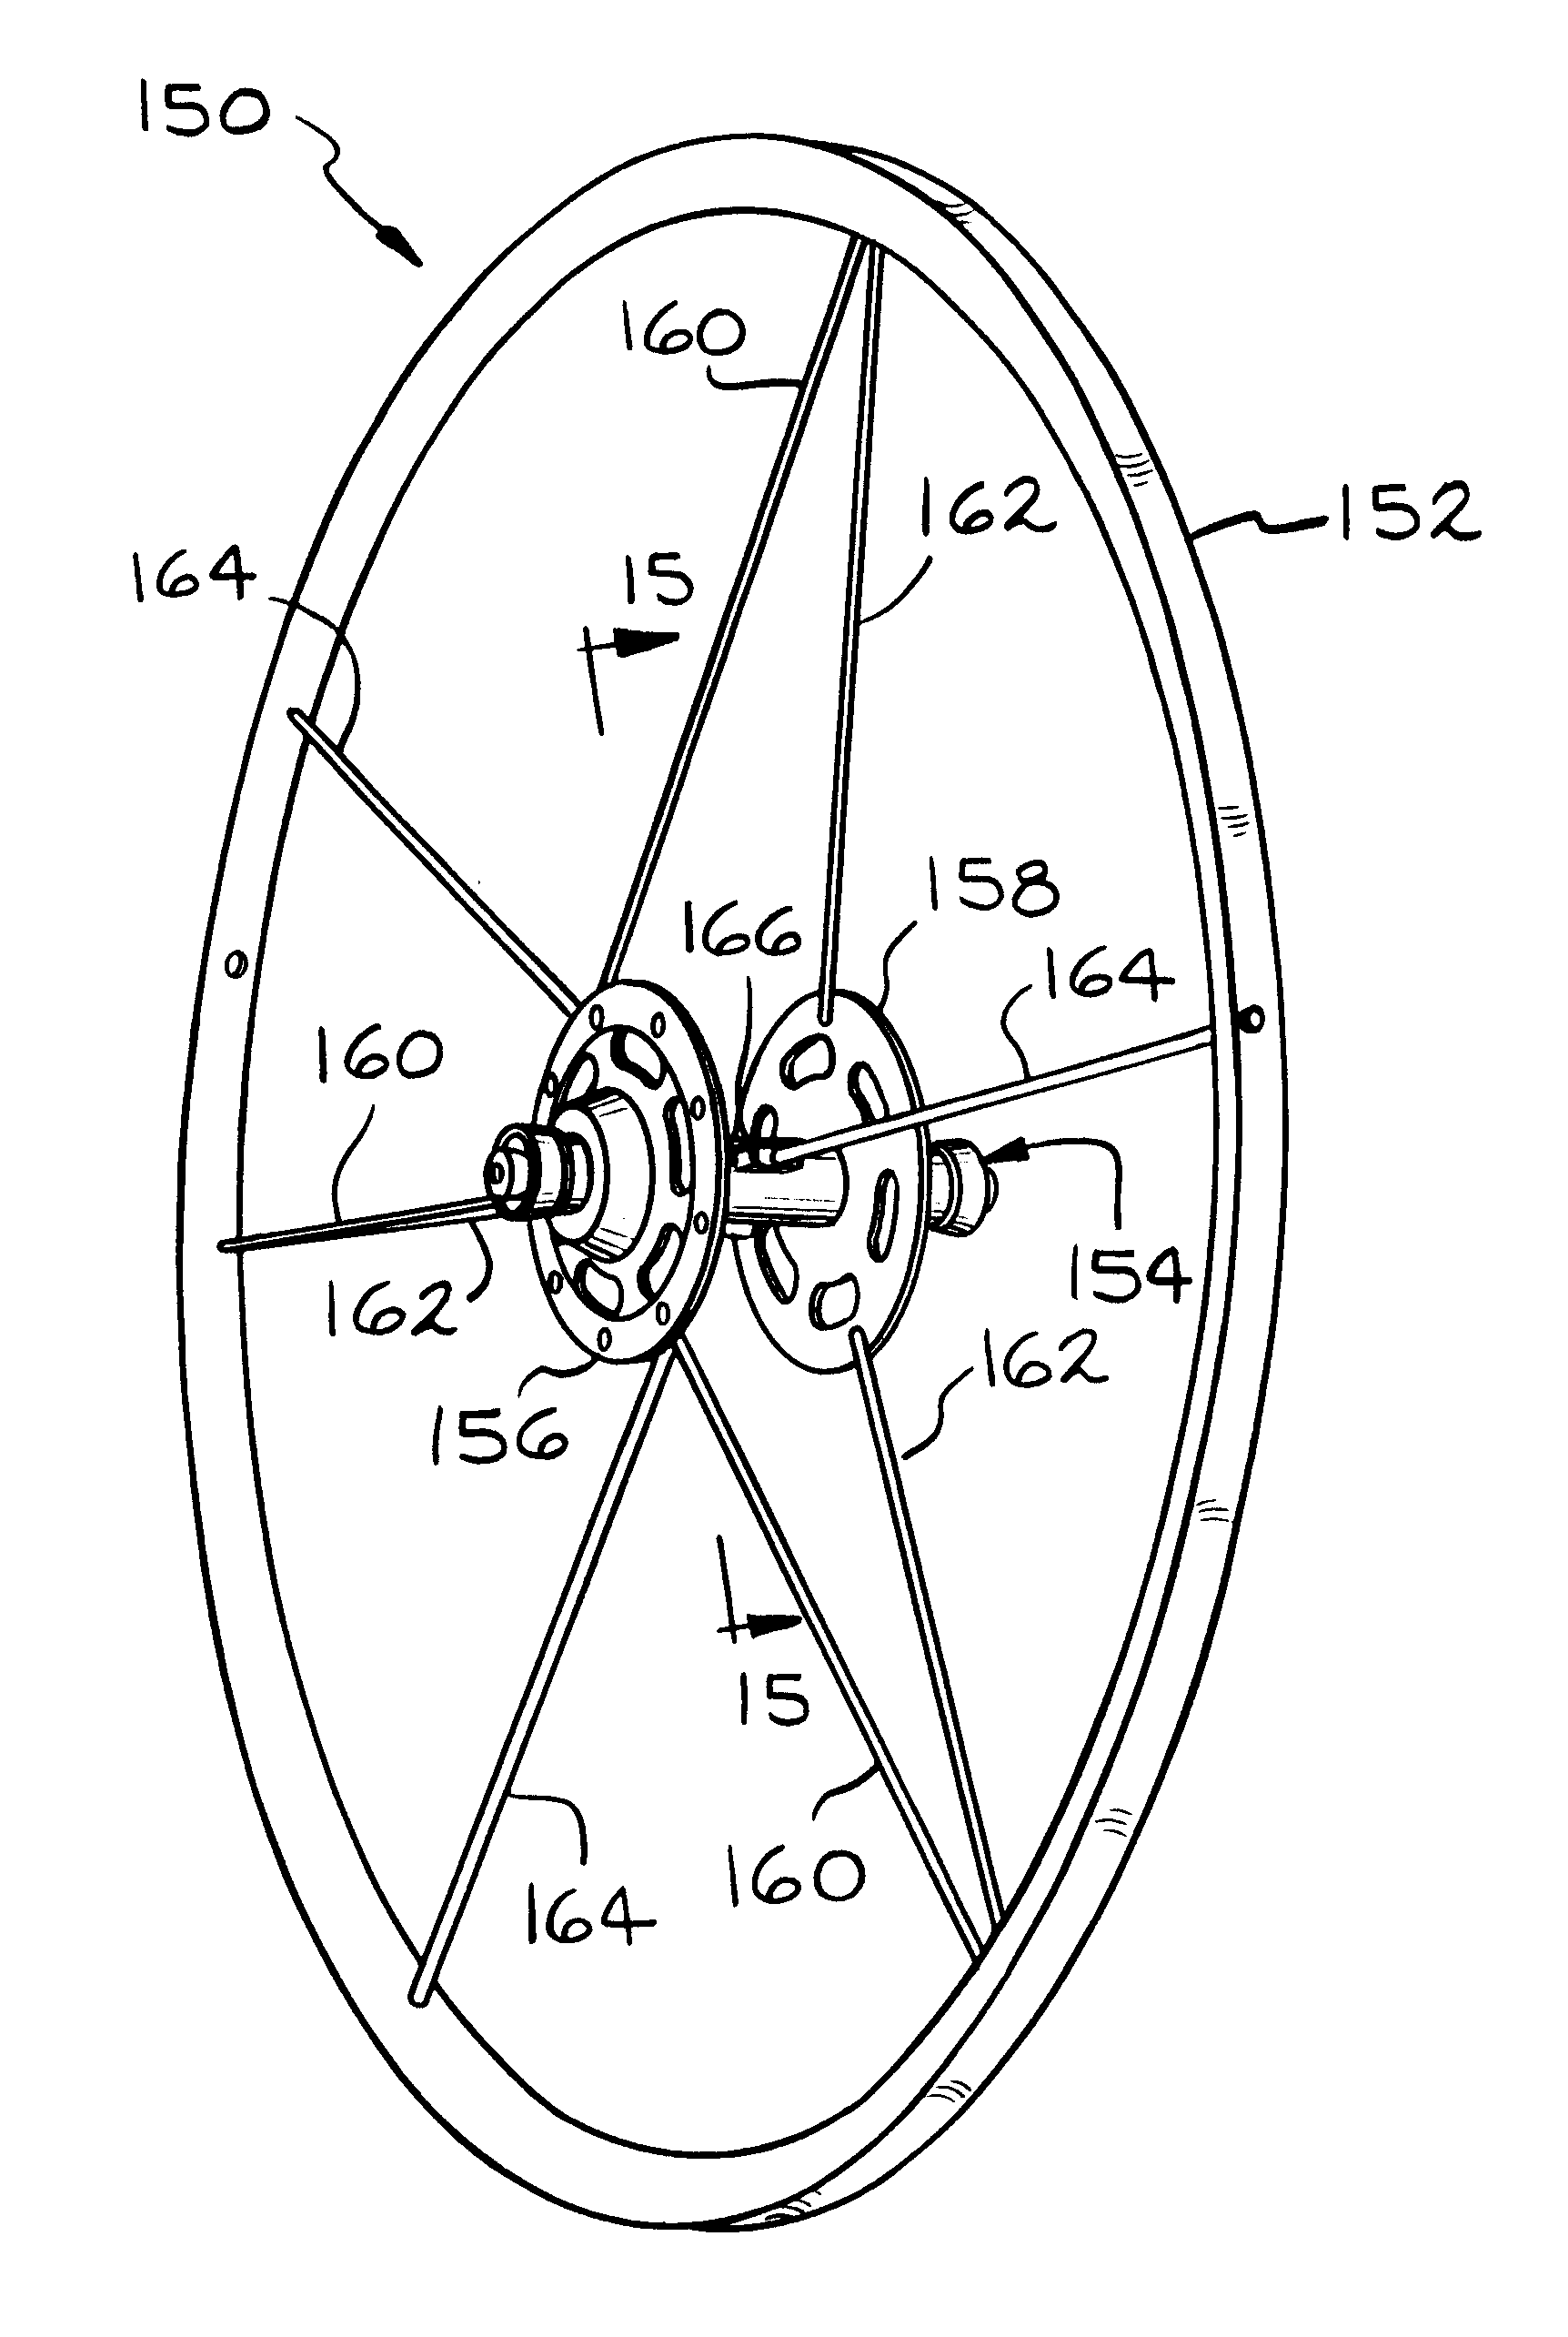 Cycle and tensioned spoked wheel assembly